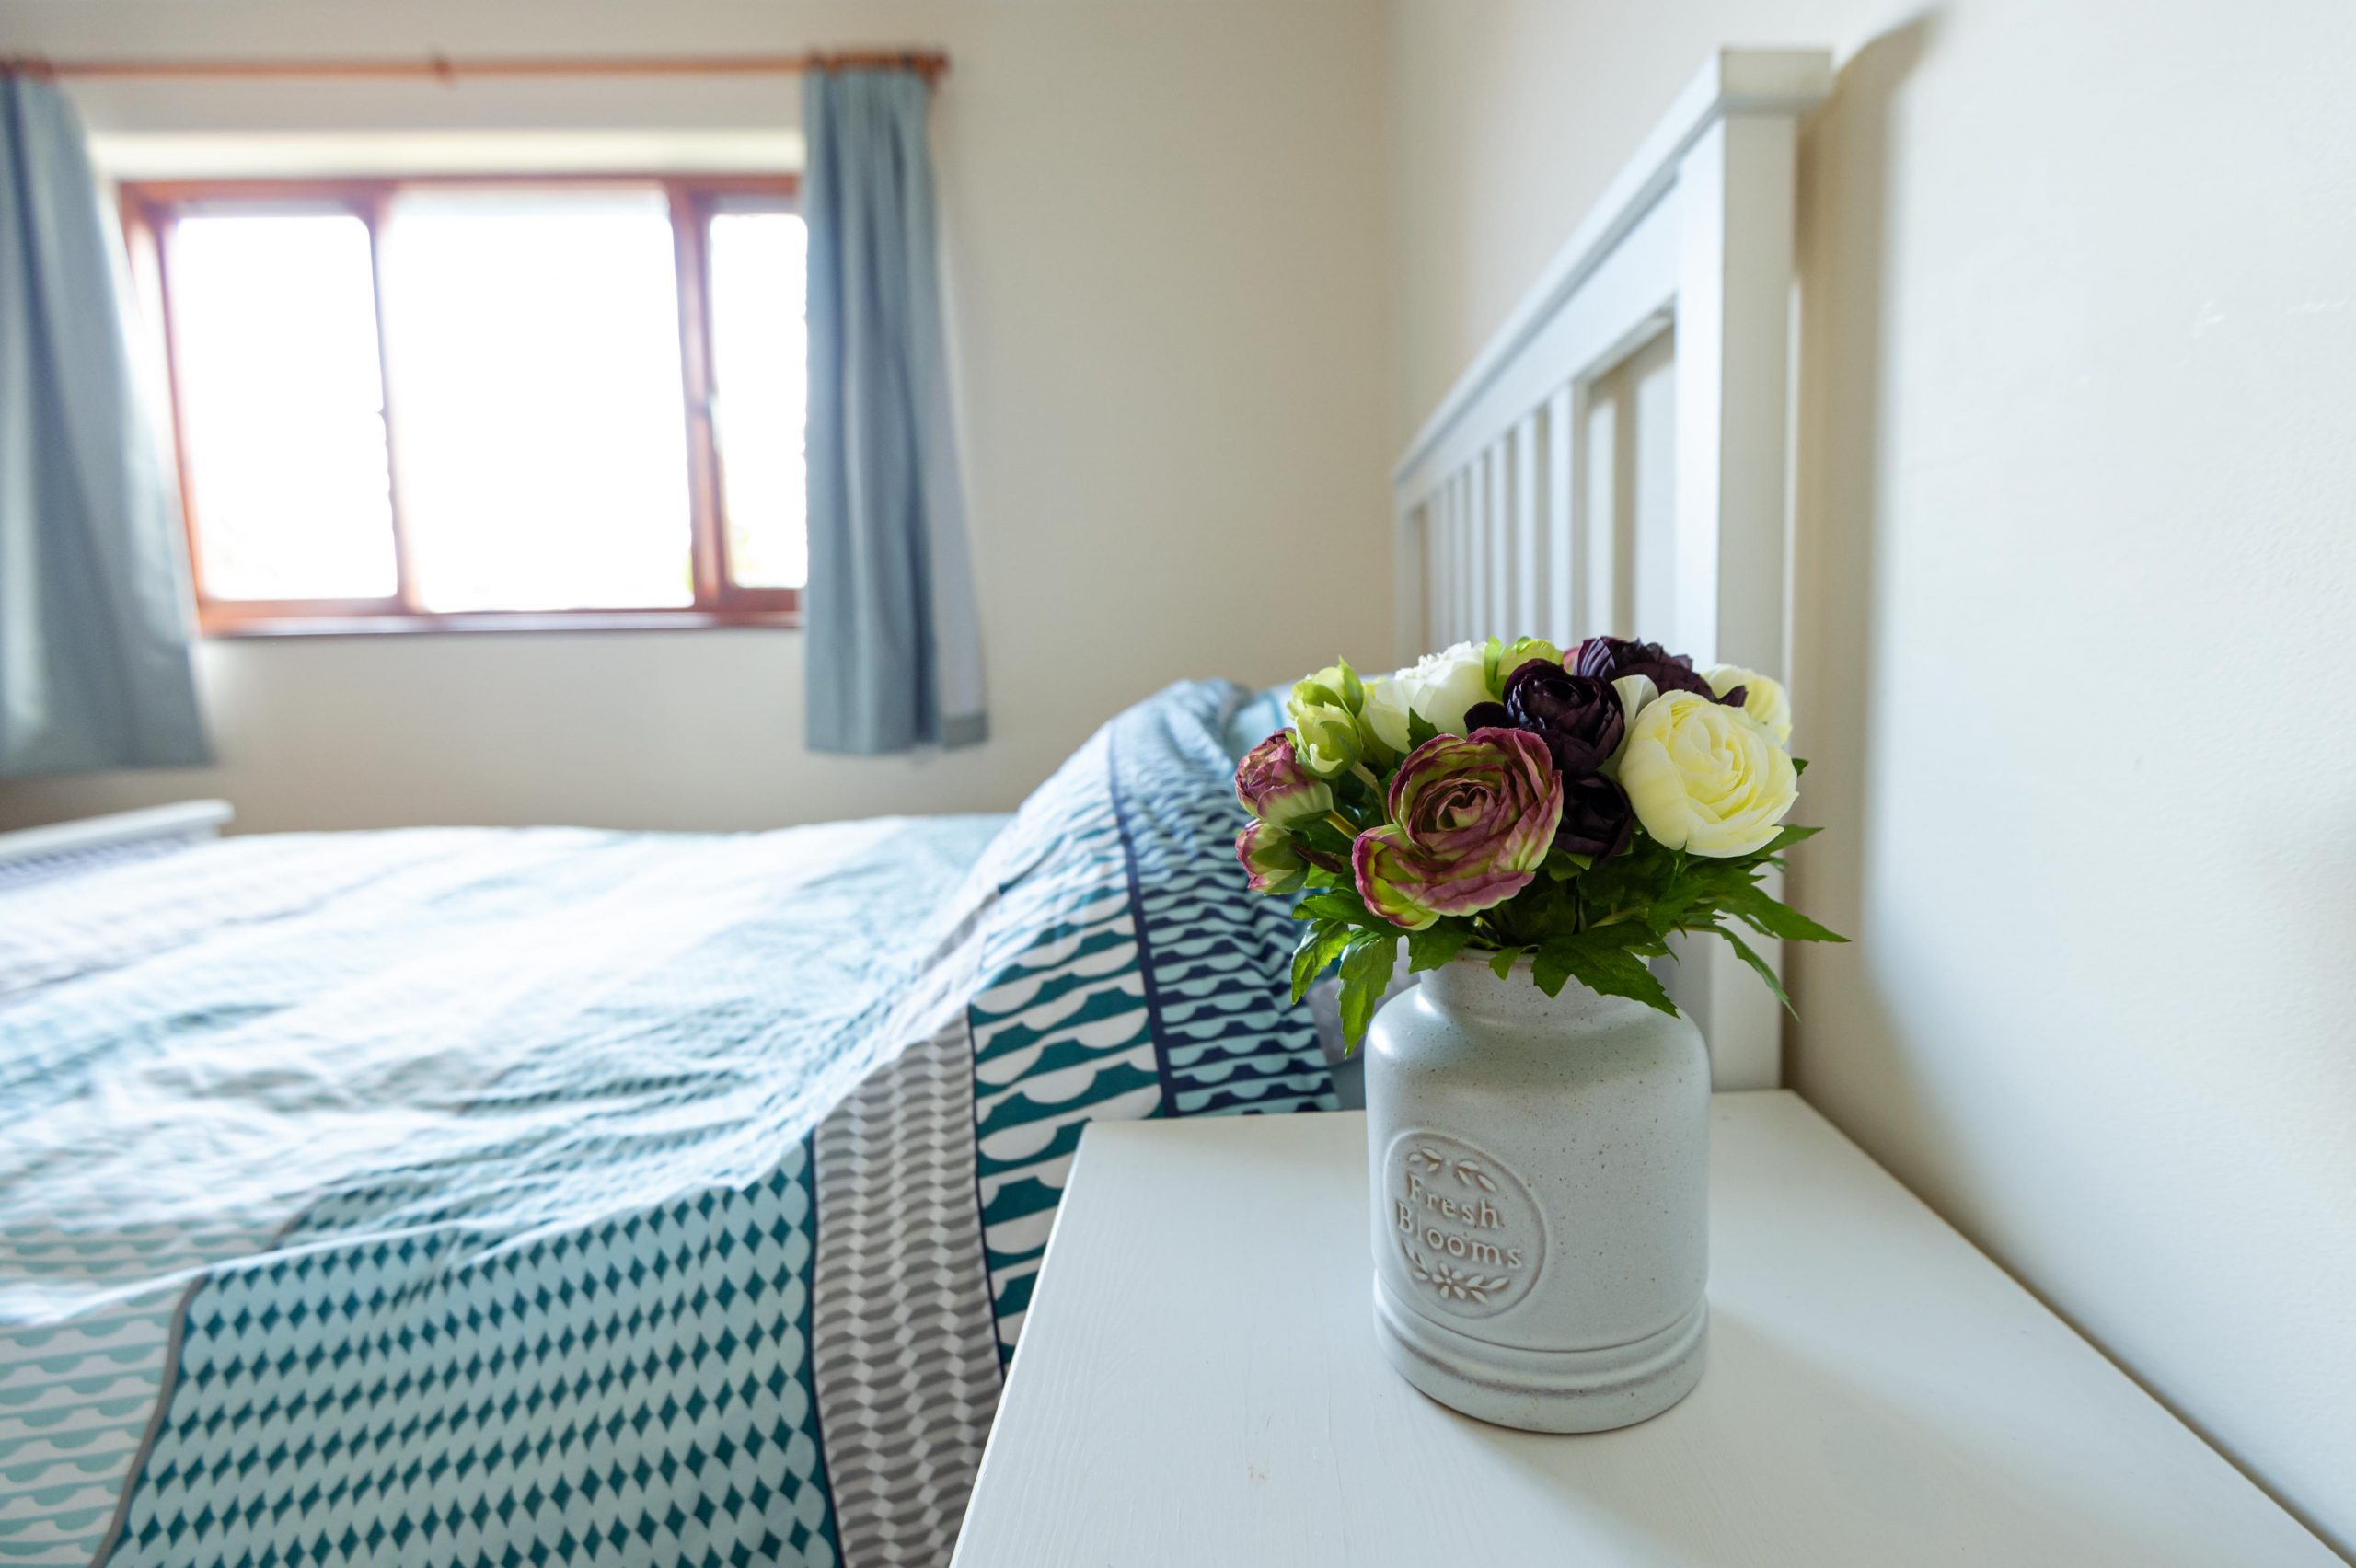 Flowers in front of double bed